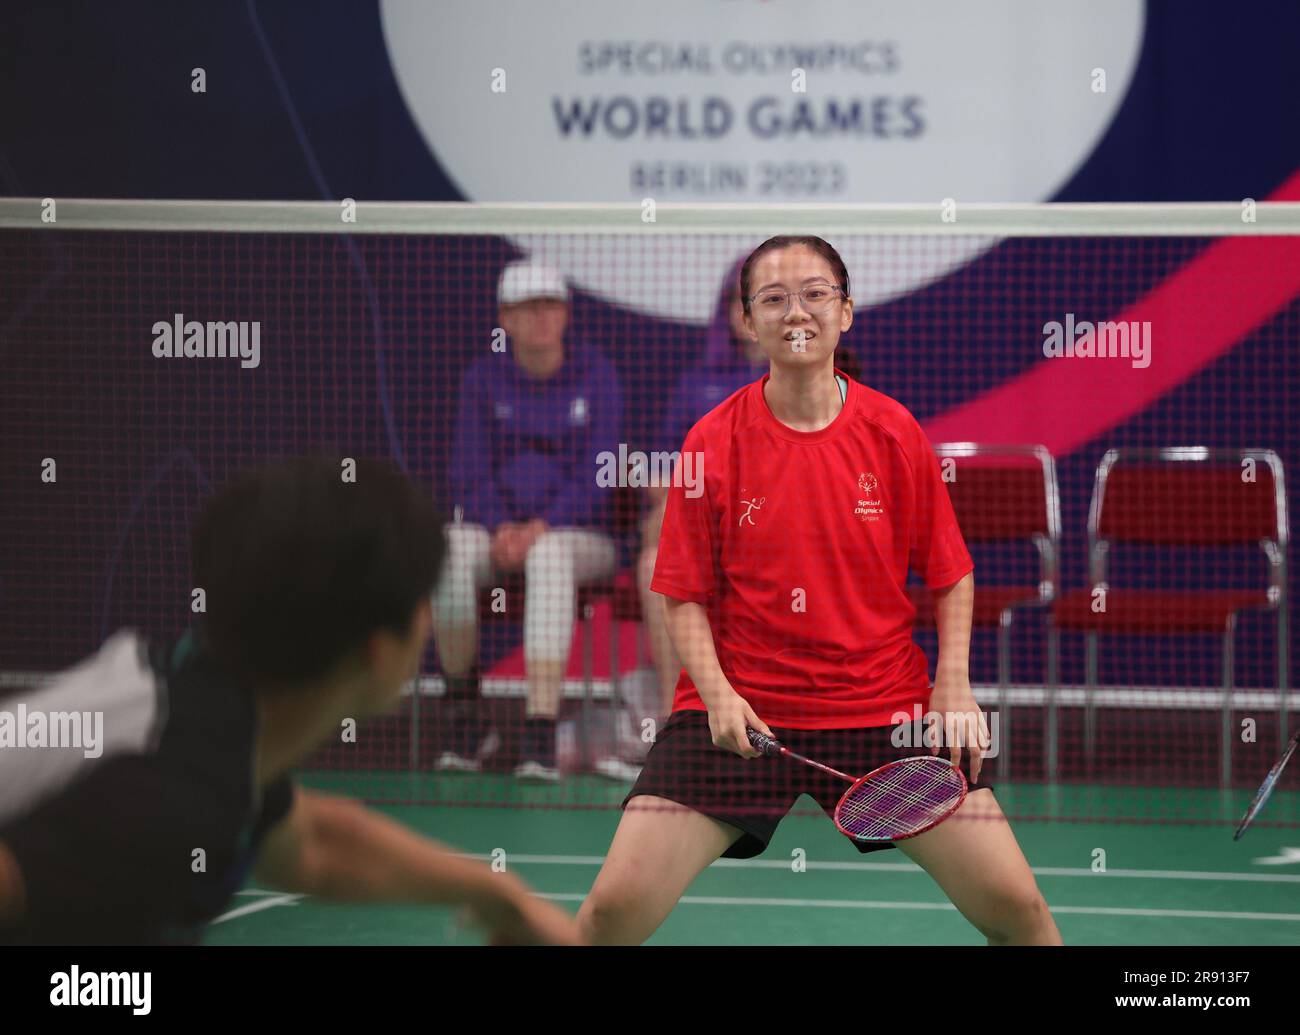 Berlin, Germany. 21st June, 2023. SO Singapore Tan/Bin Razid v SO Korea Lim/Lee compete on the badminton mixed doubles during the Special Olympics World Games Berlin 2023, the world's largest inclusive sports event where thousands of athletes with intellectual disabilities compete together in 26 sports from 17 to 25 June 2023. Credit: Isabel Infantes/Empics/Alamy Live News Stock Photo